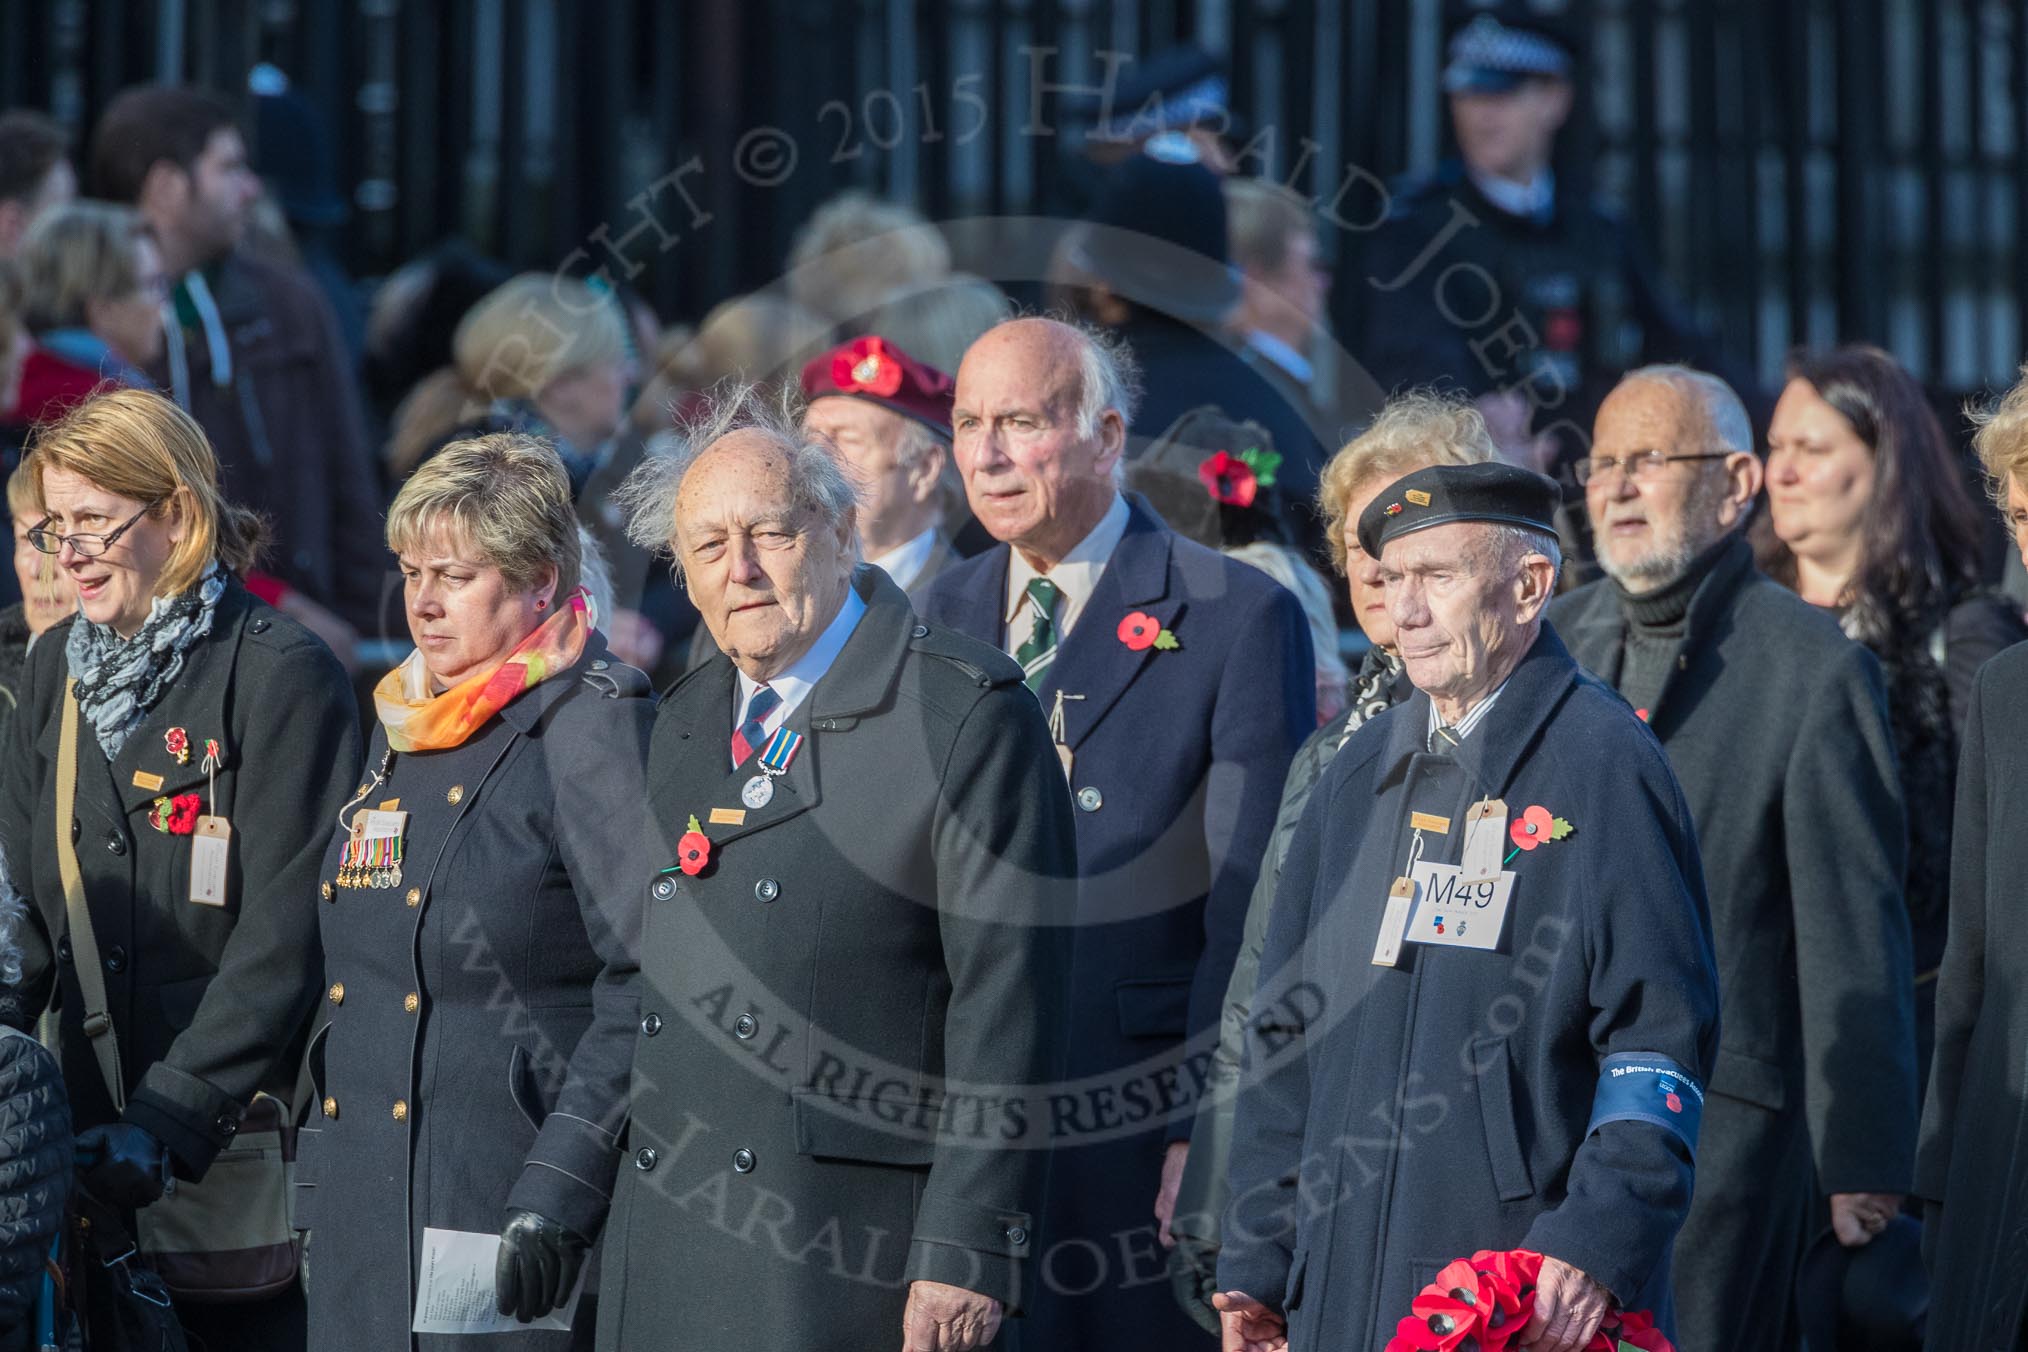 March Past, Remembrance Sunday at the Cenotaph 2016: M49 The British Evacuees Association.
Cenotaph, Whitehall, London SW1,
London,
Greater London,
United Kingdom,
on 13 November 2016 at 13:20, image #3018